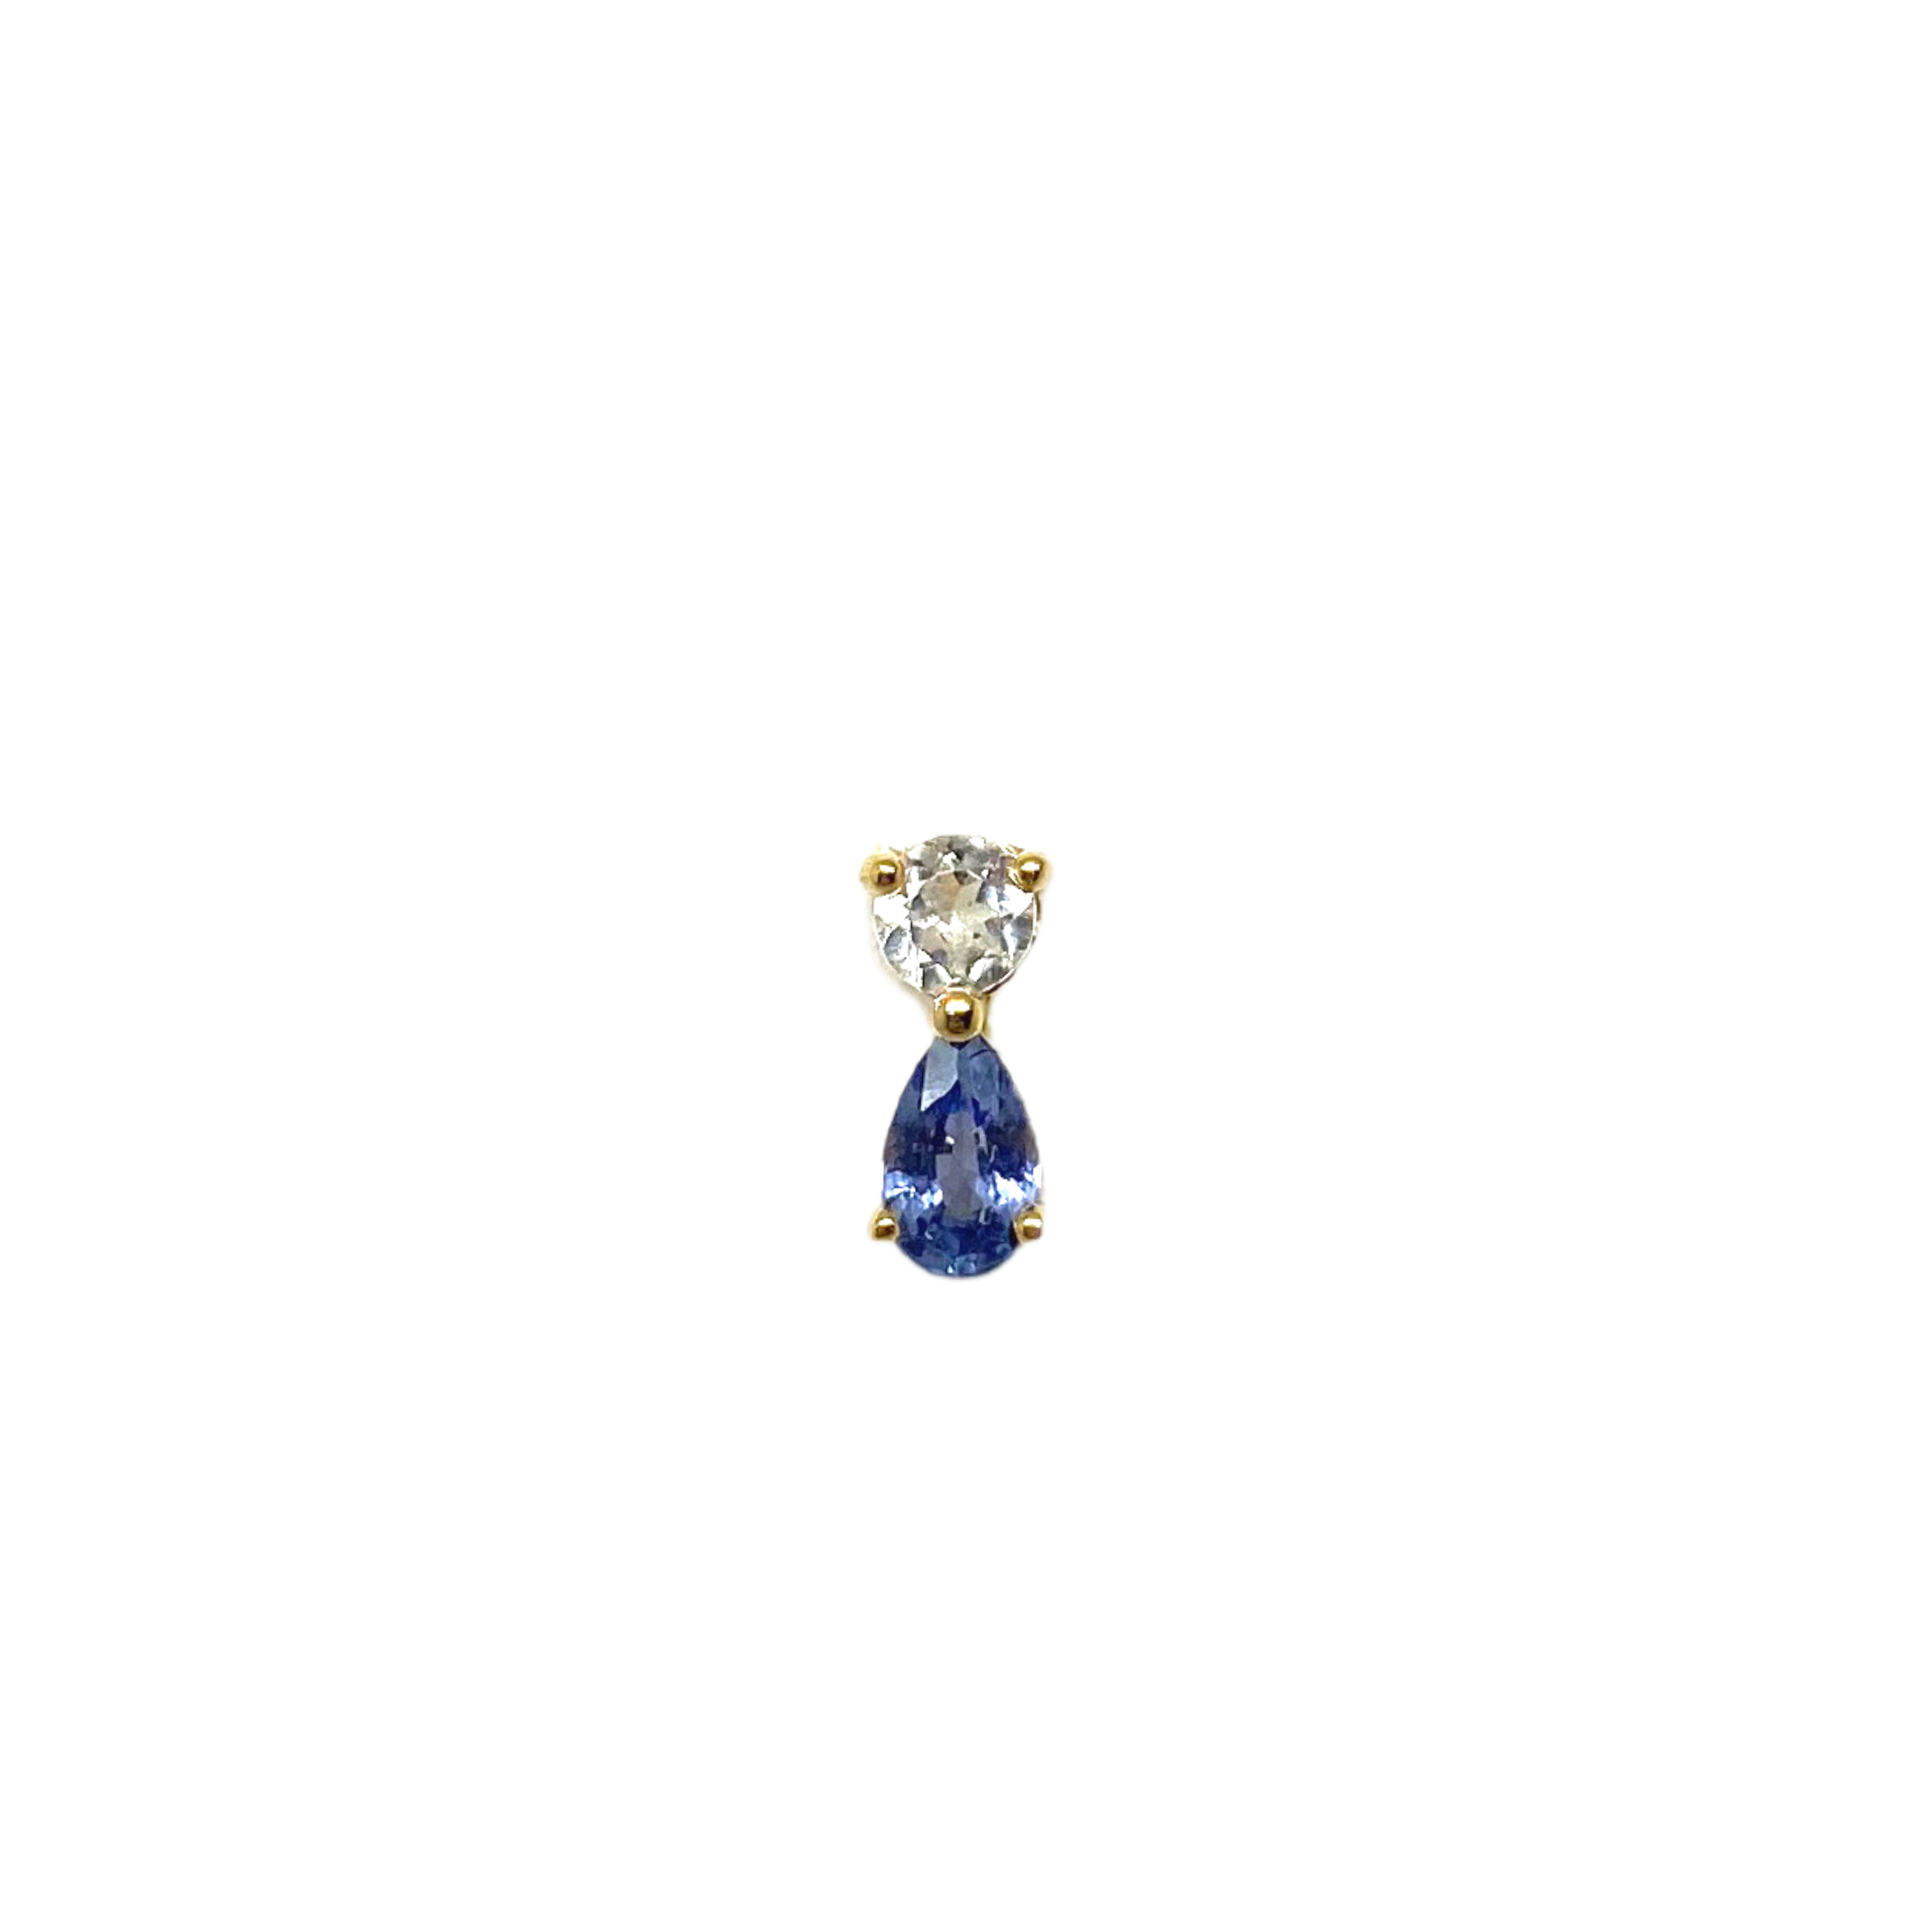 White Topaz And Blue Sapphire Double Stud